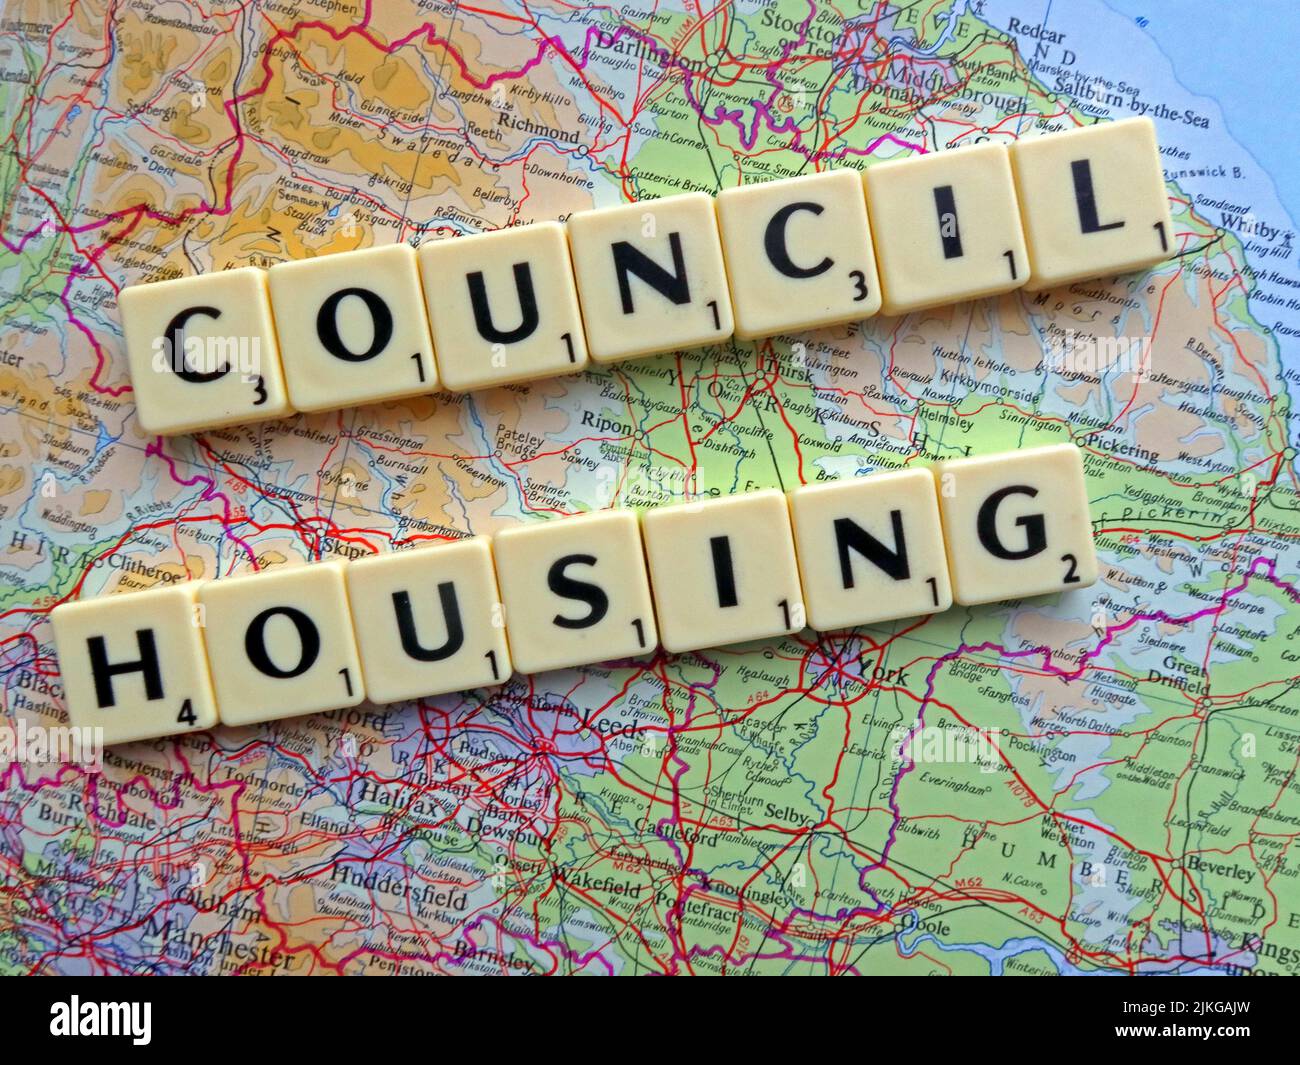 Council Housing spelled out in Scrabble letters on a map of England, a policy already rejected by Scotland and Wales assembles Stock Photo